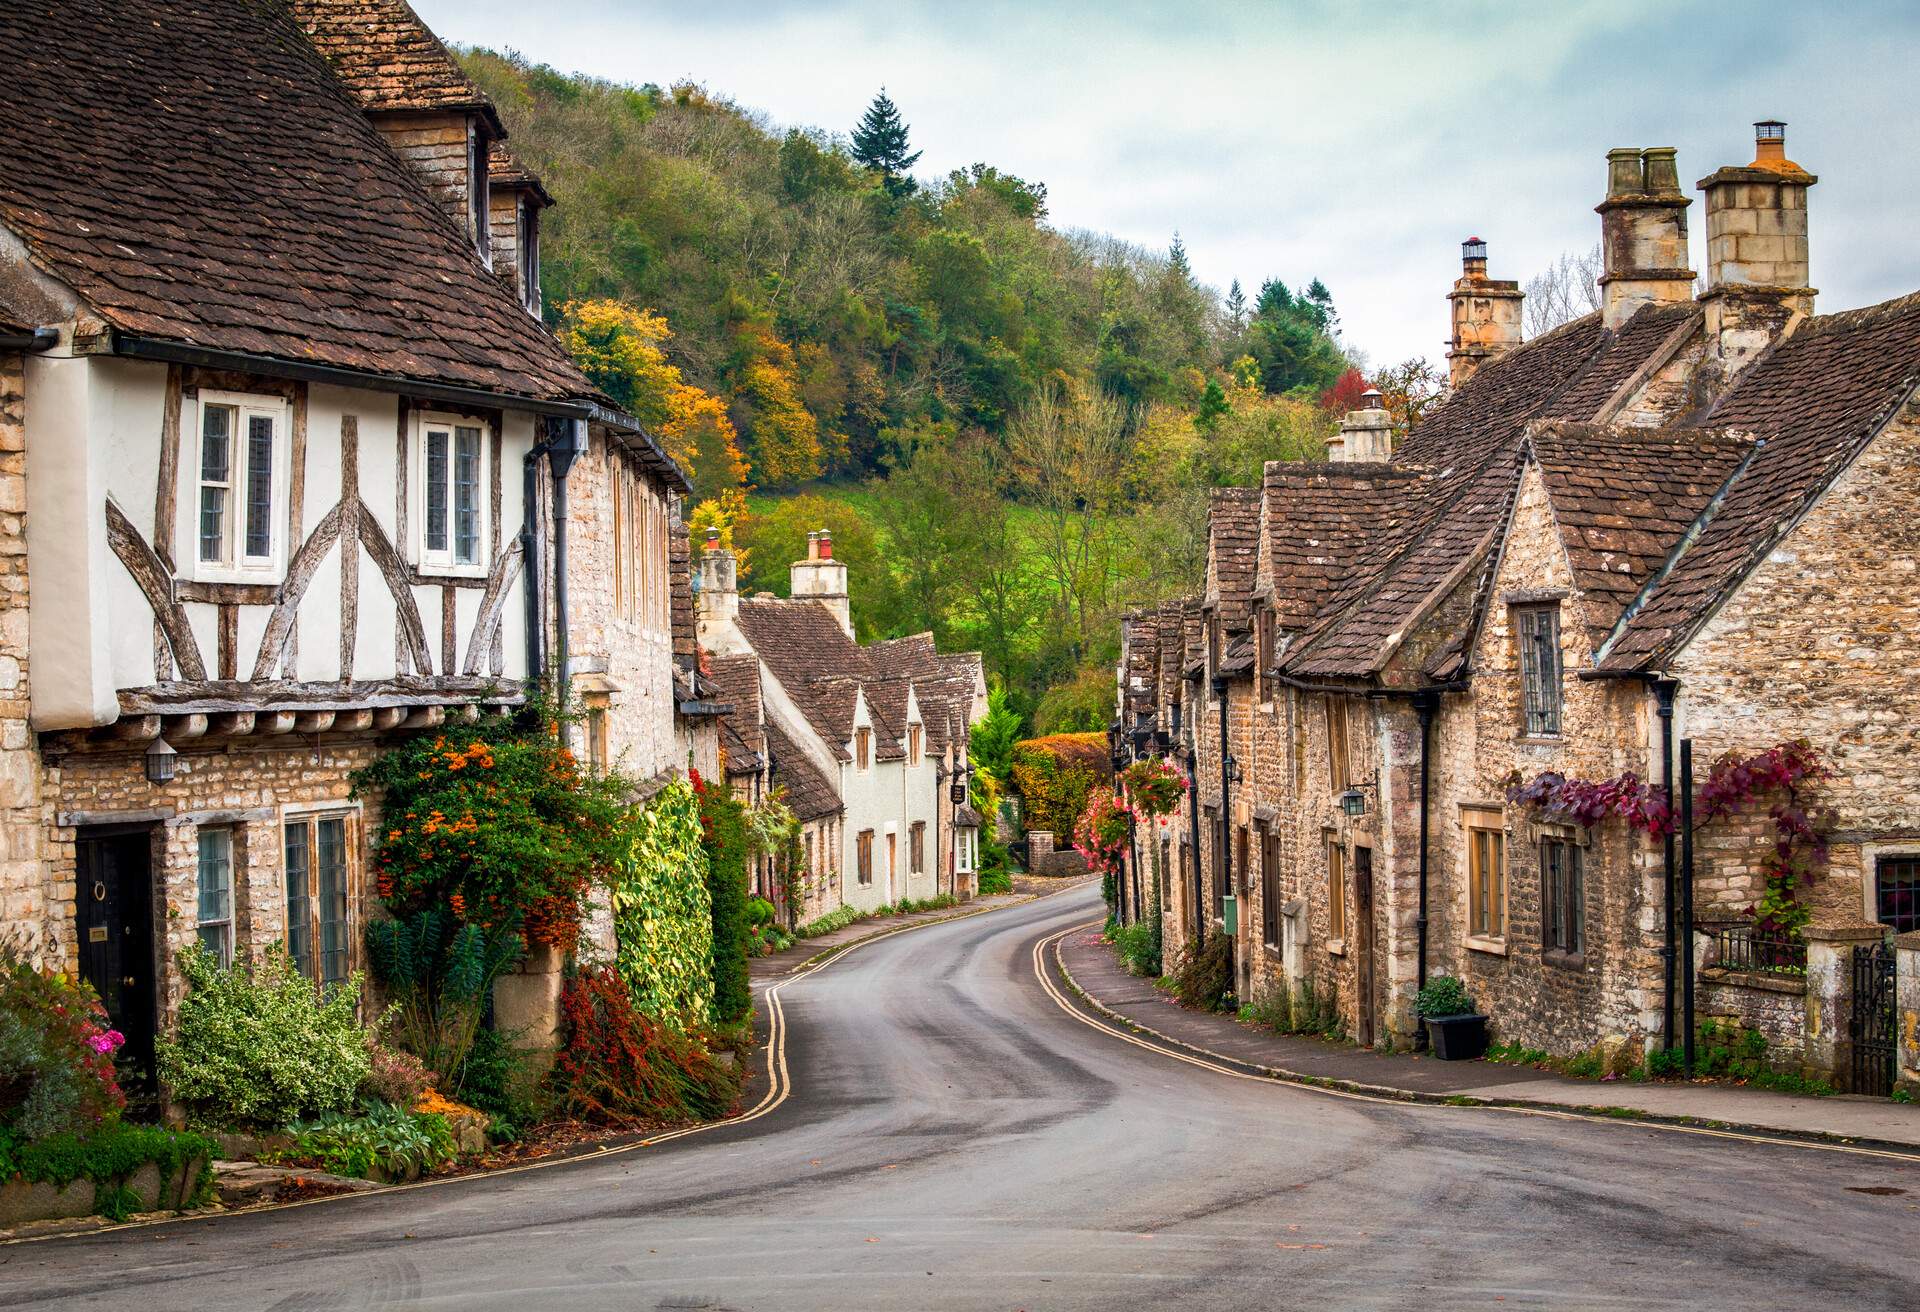 DEST_UK_WILTSHIRE_Castle Combe in the Fall_GettyImages-157006201